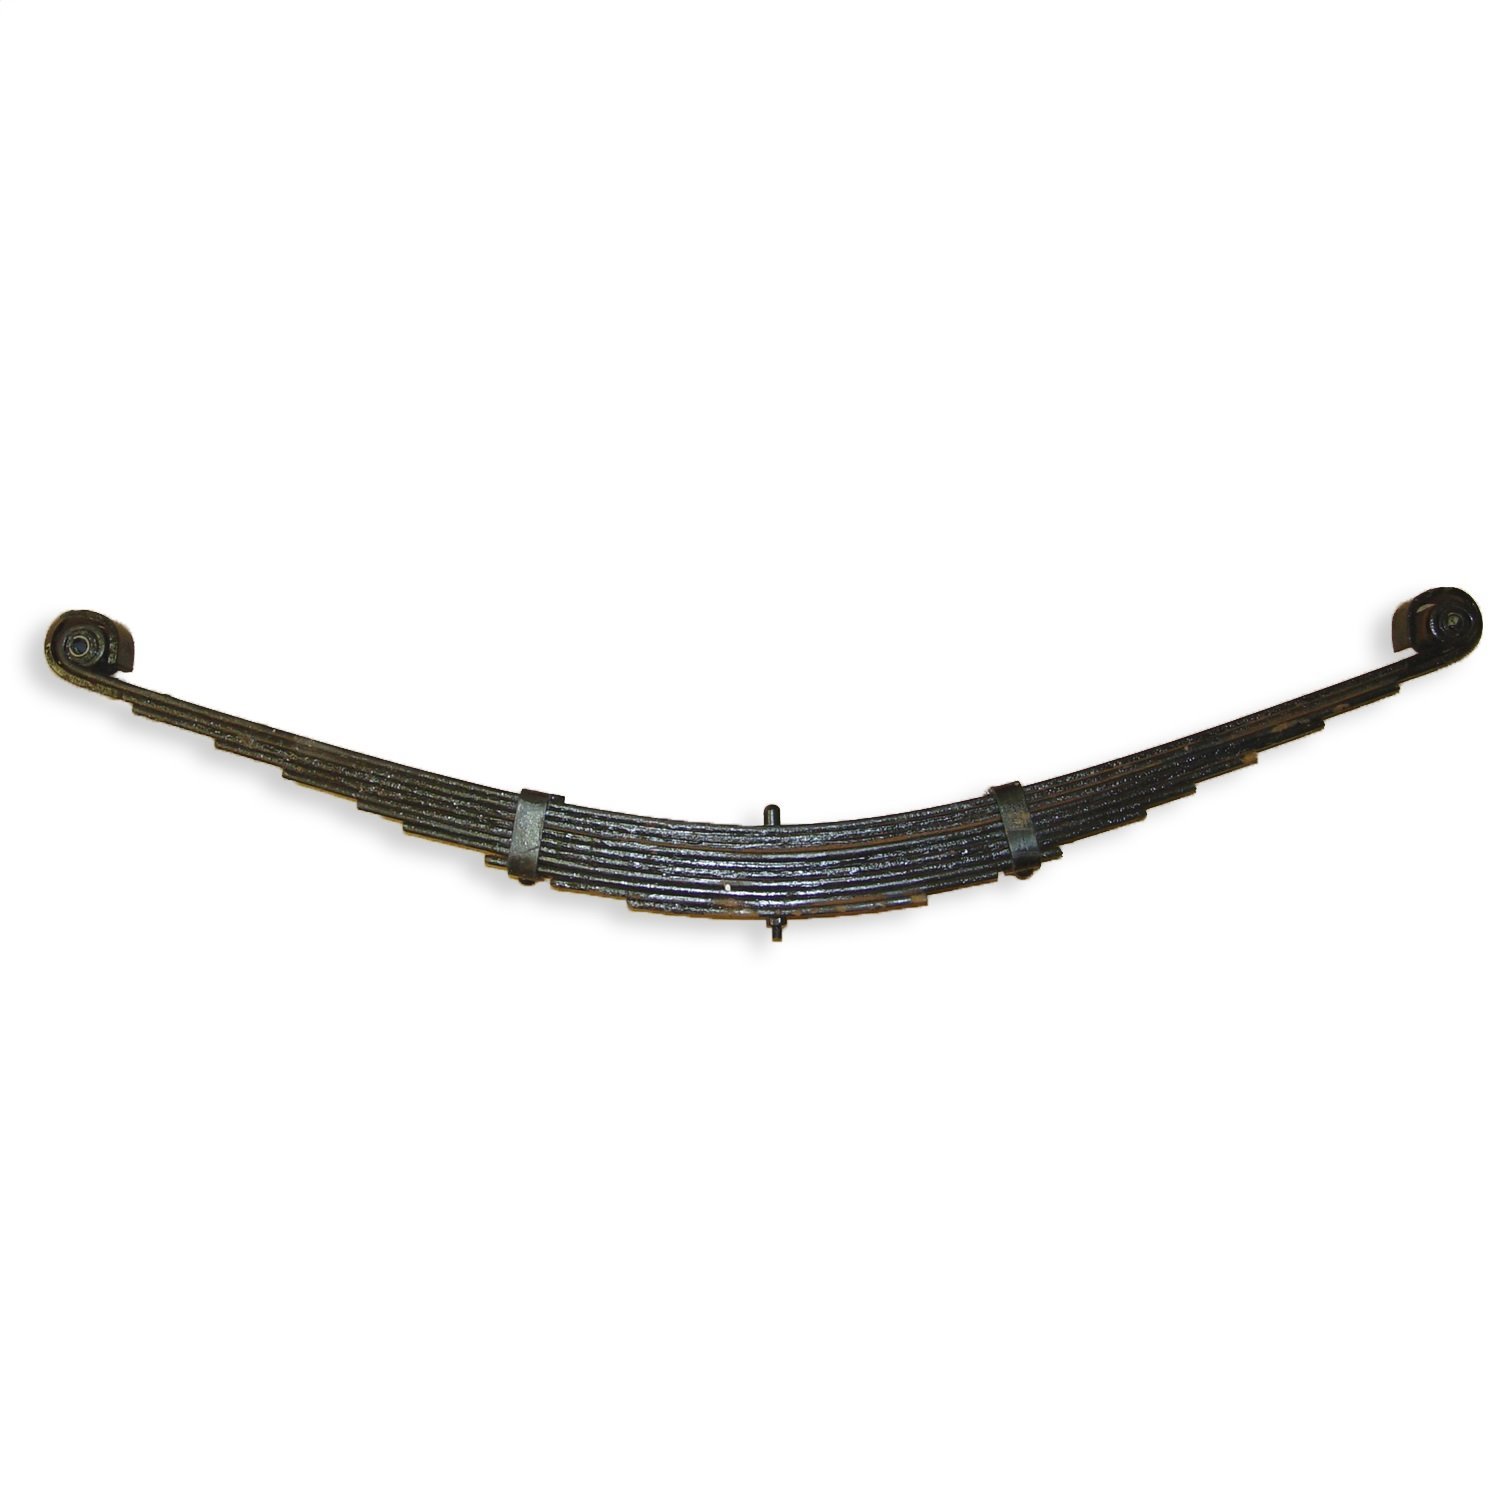 Stock replacement 10-leaf front spring from Omix-ADA, Fits 55-75 Jeep CJ5 and CJ6